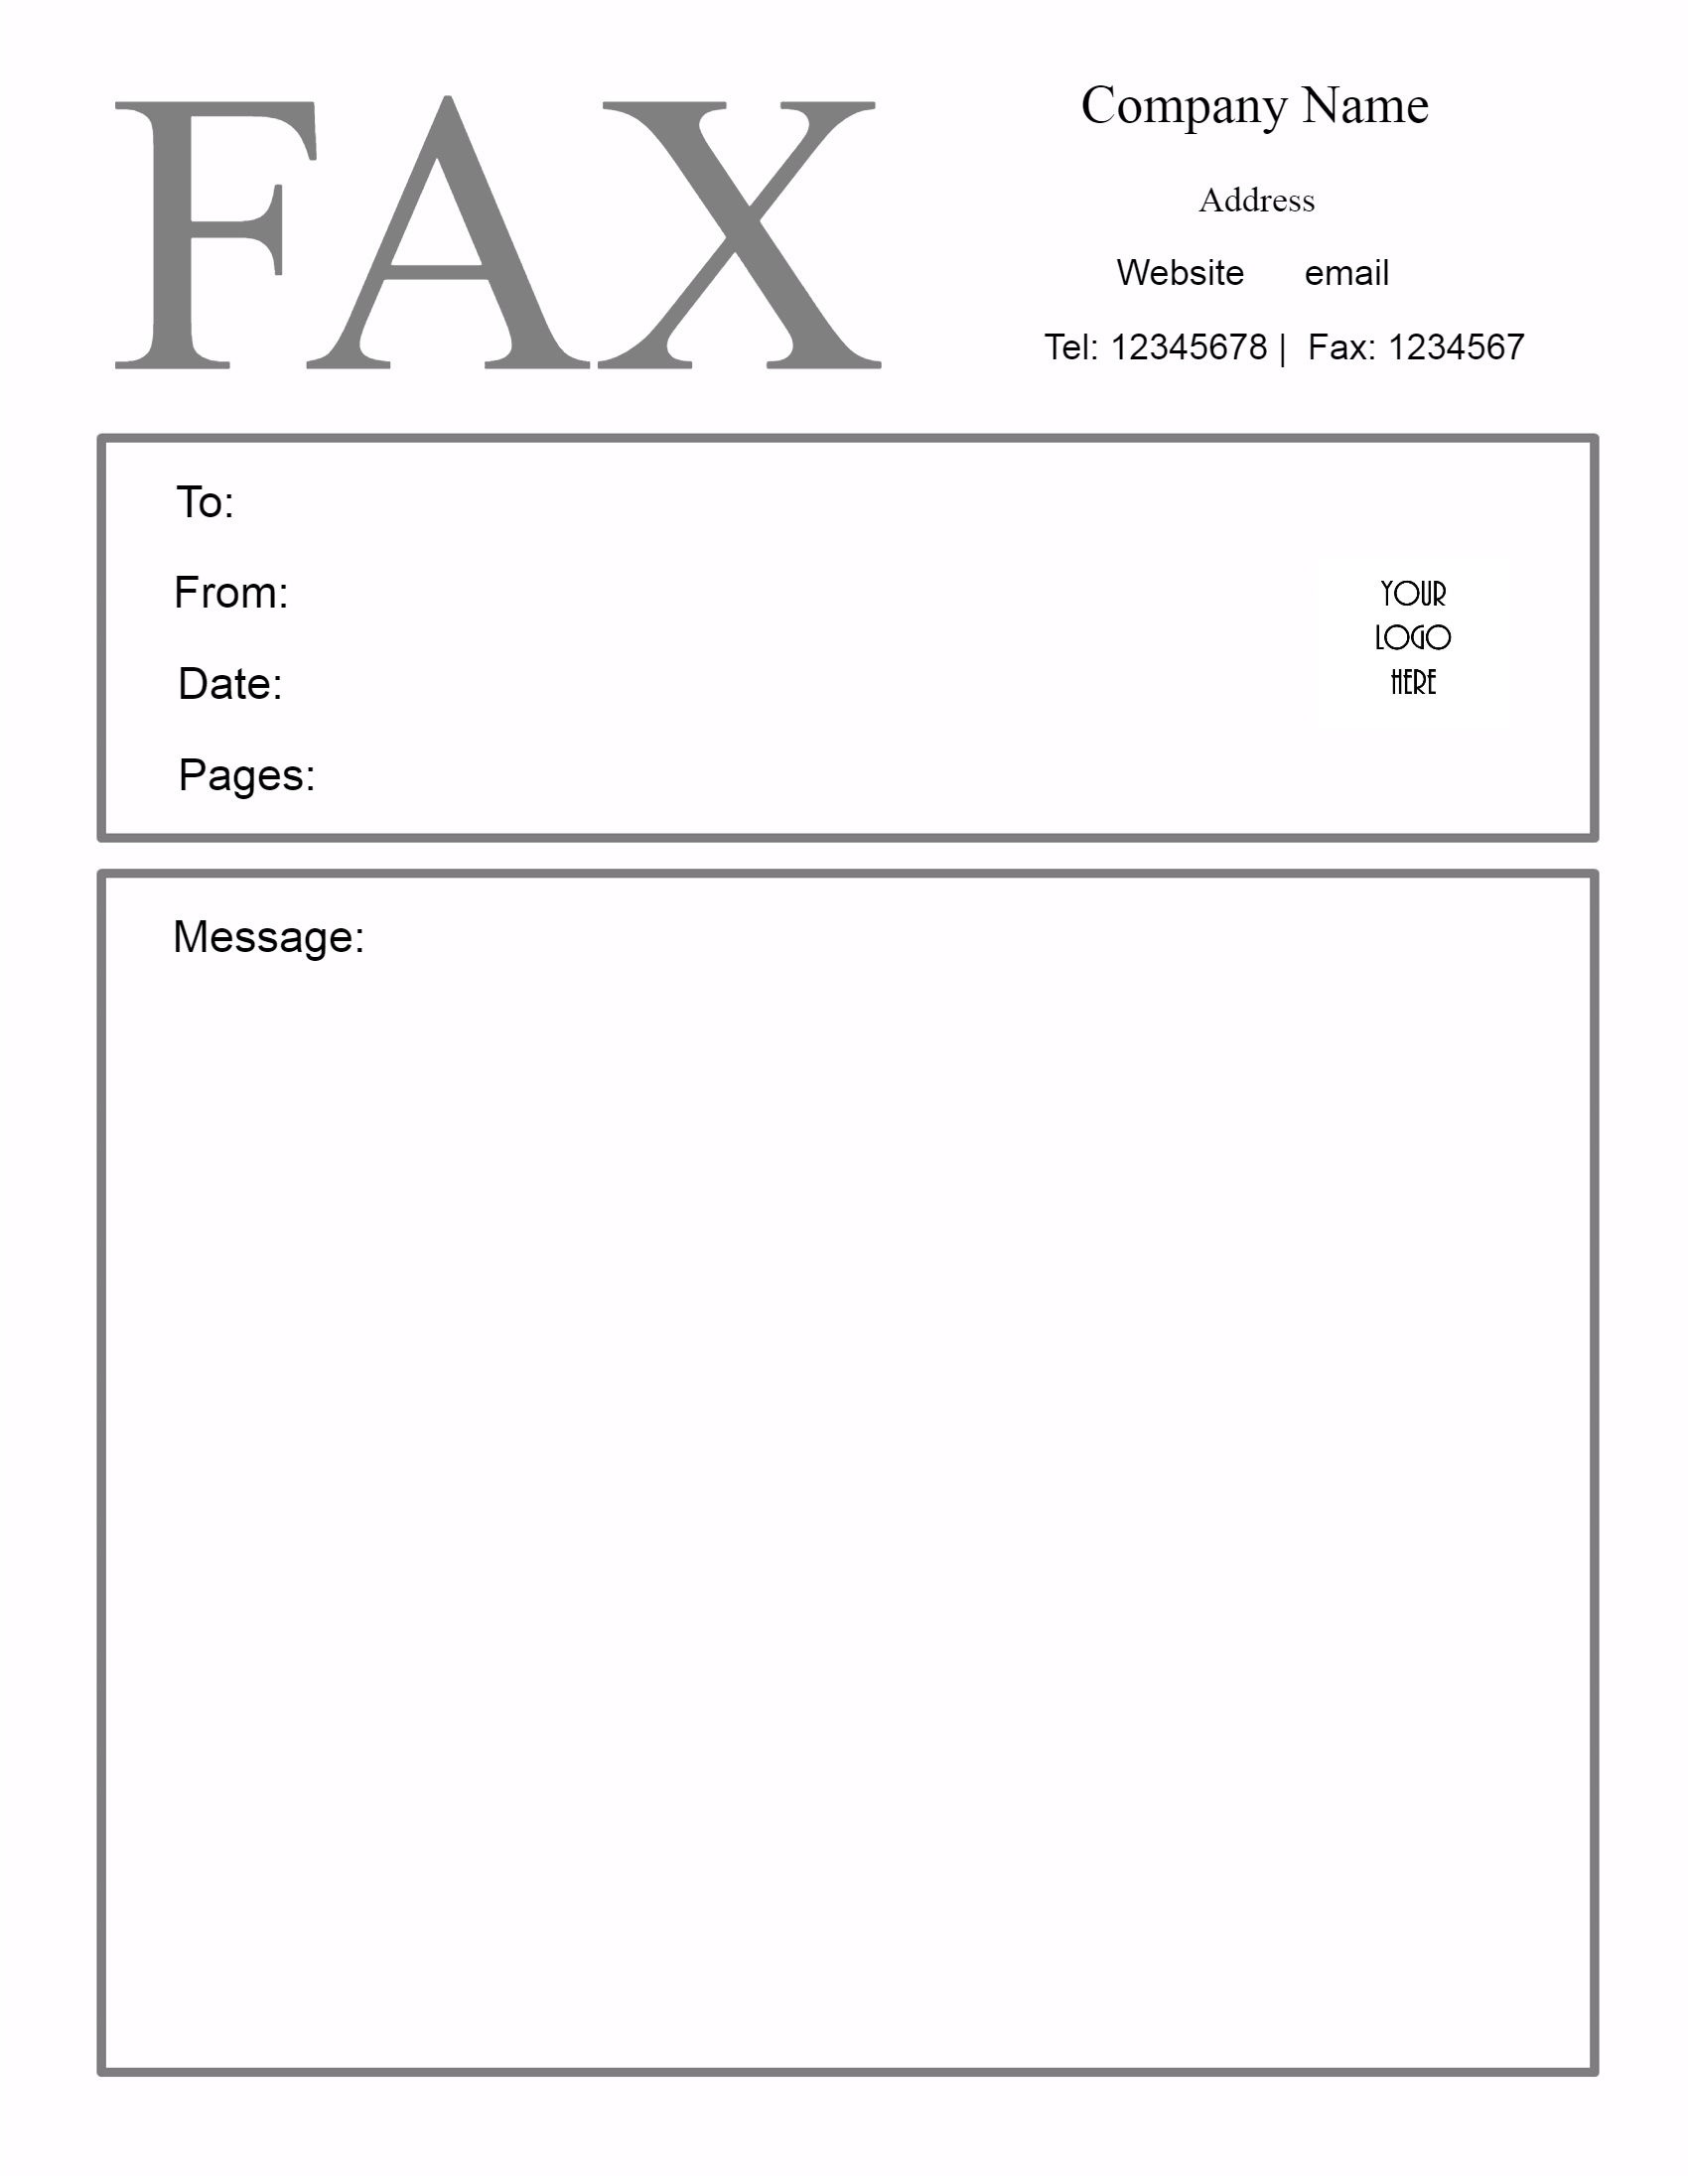 Free Fax Cover Sheet Template | Customize Online Then Print - Free Printable Cover Letter For Fax